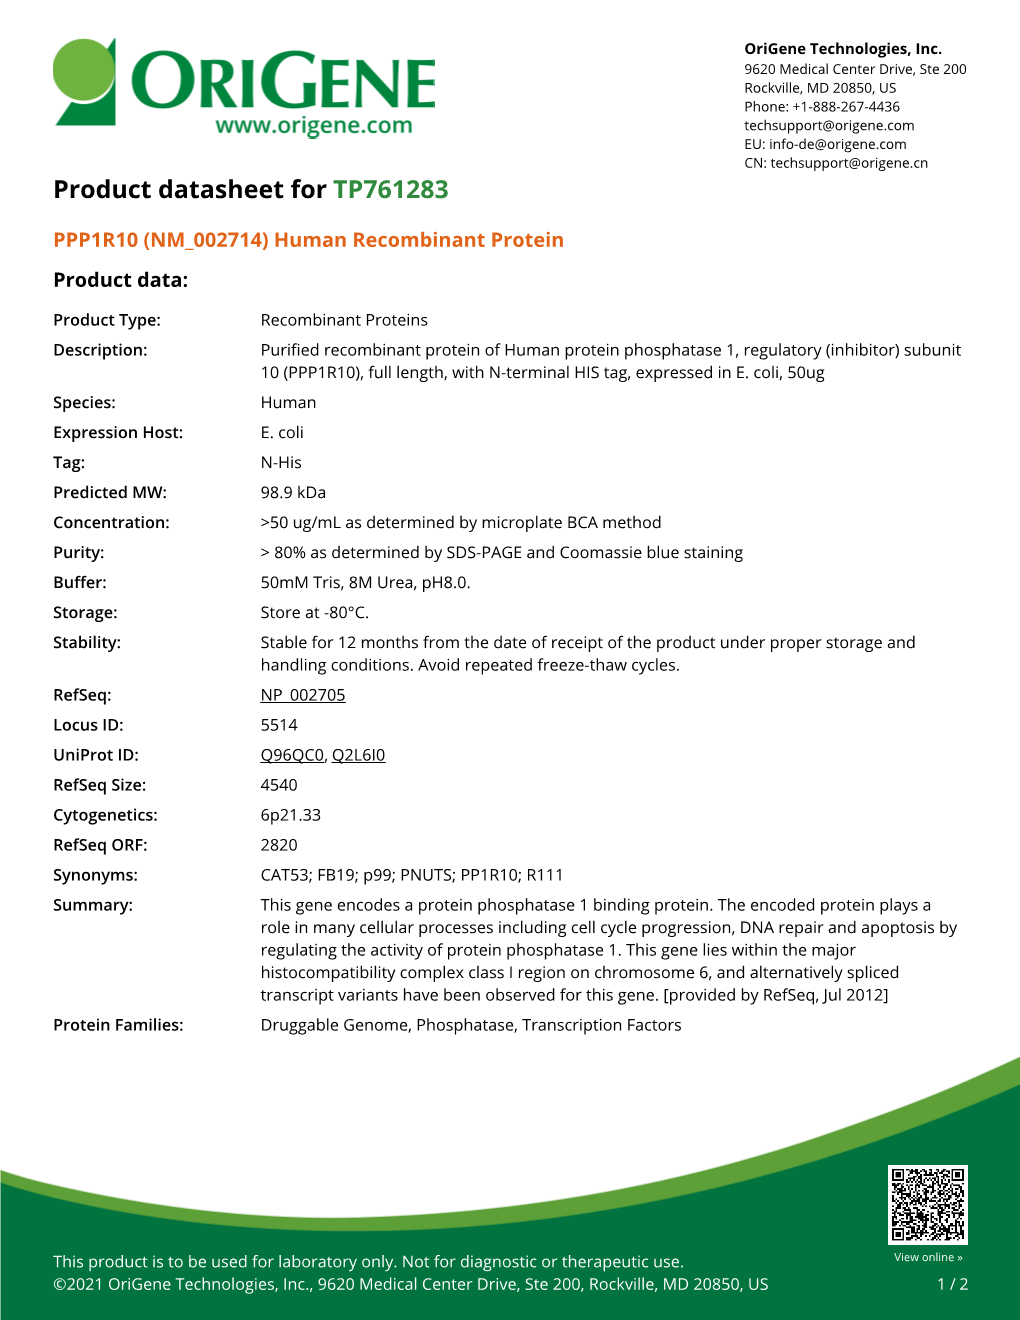 PPP1R10 (NM 002714) Human Recombinant Protein Product Data